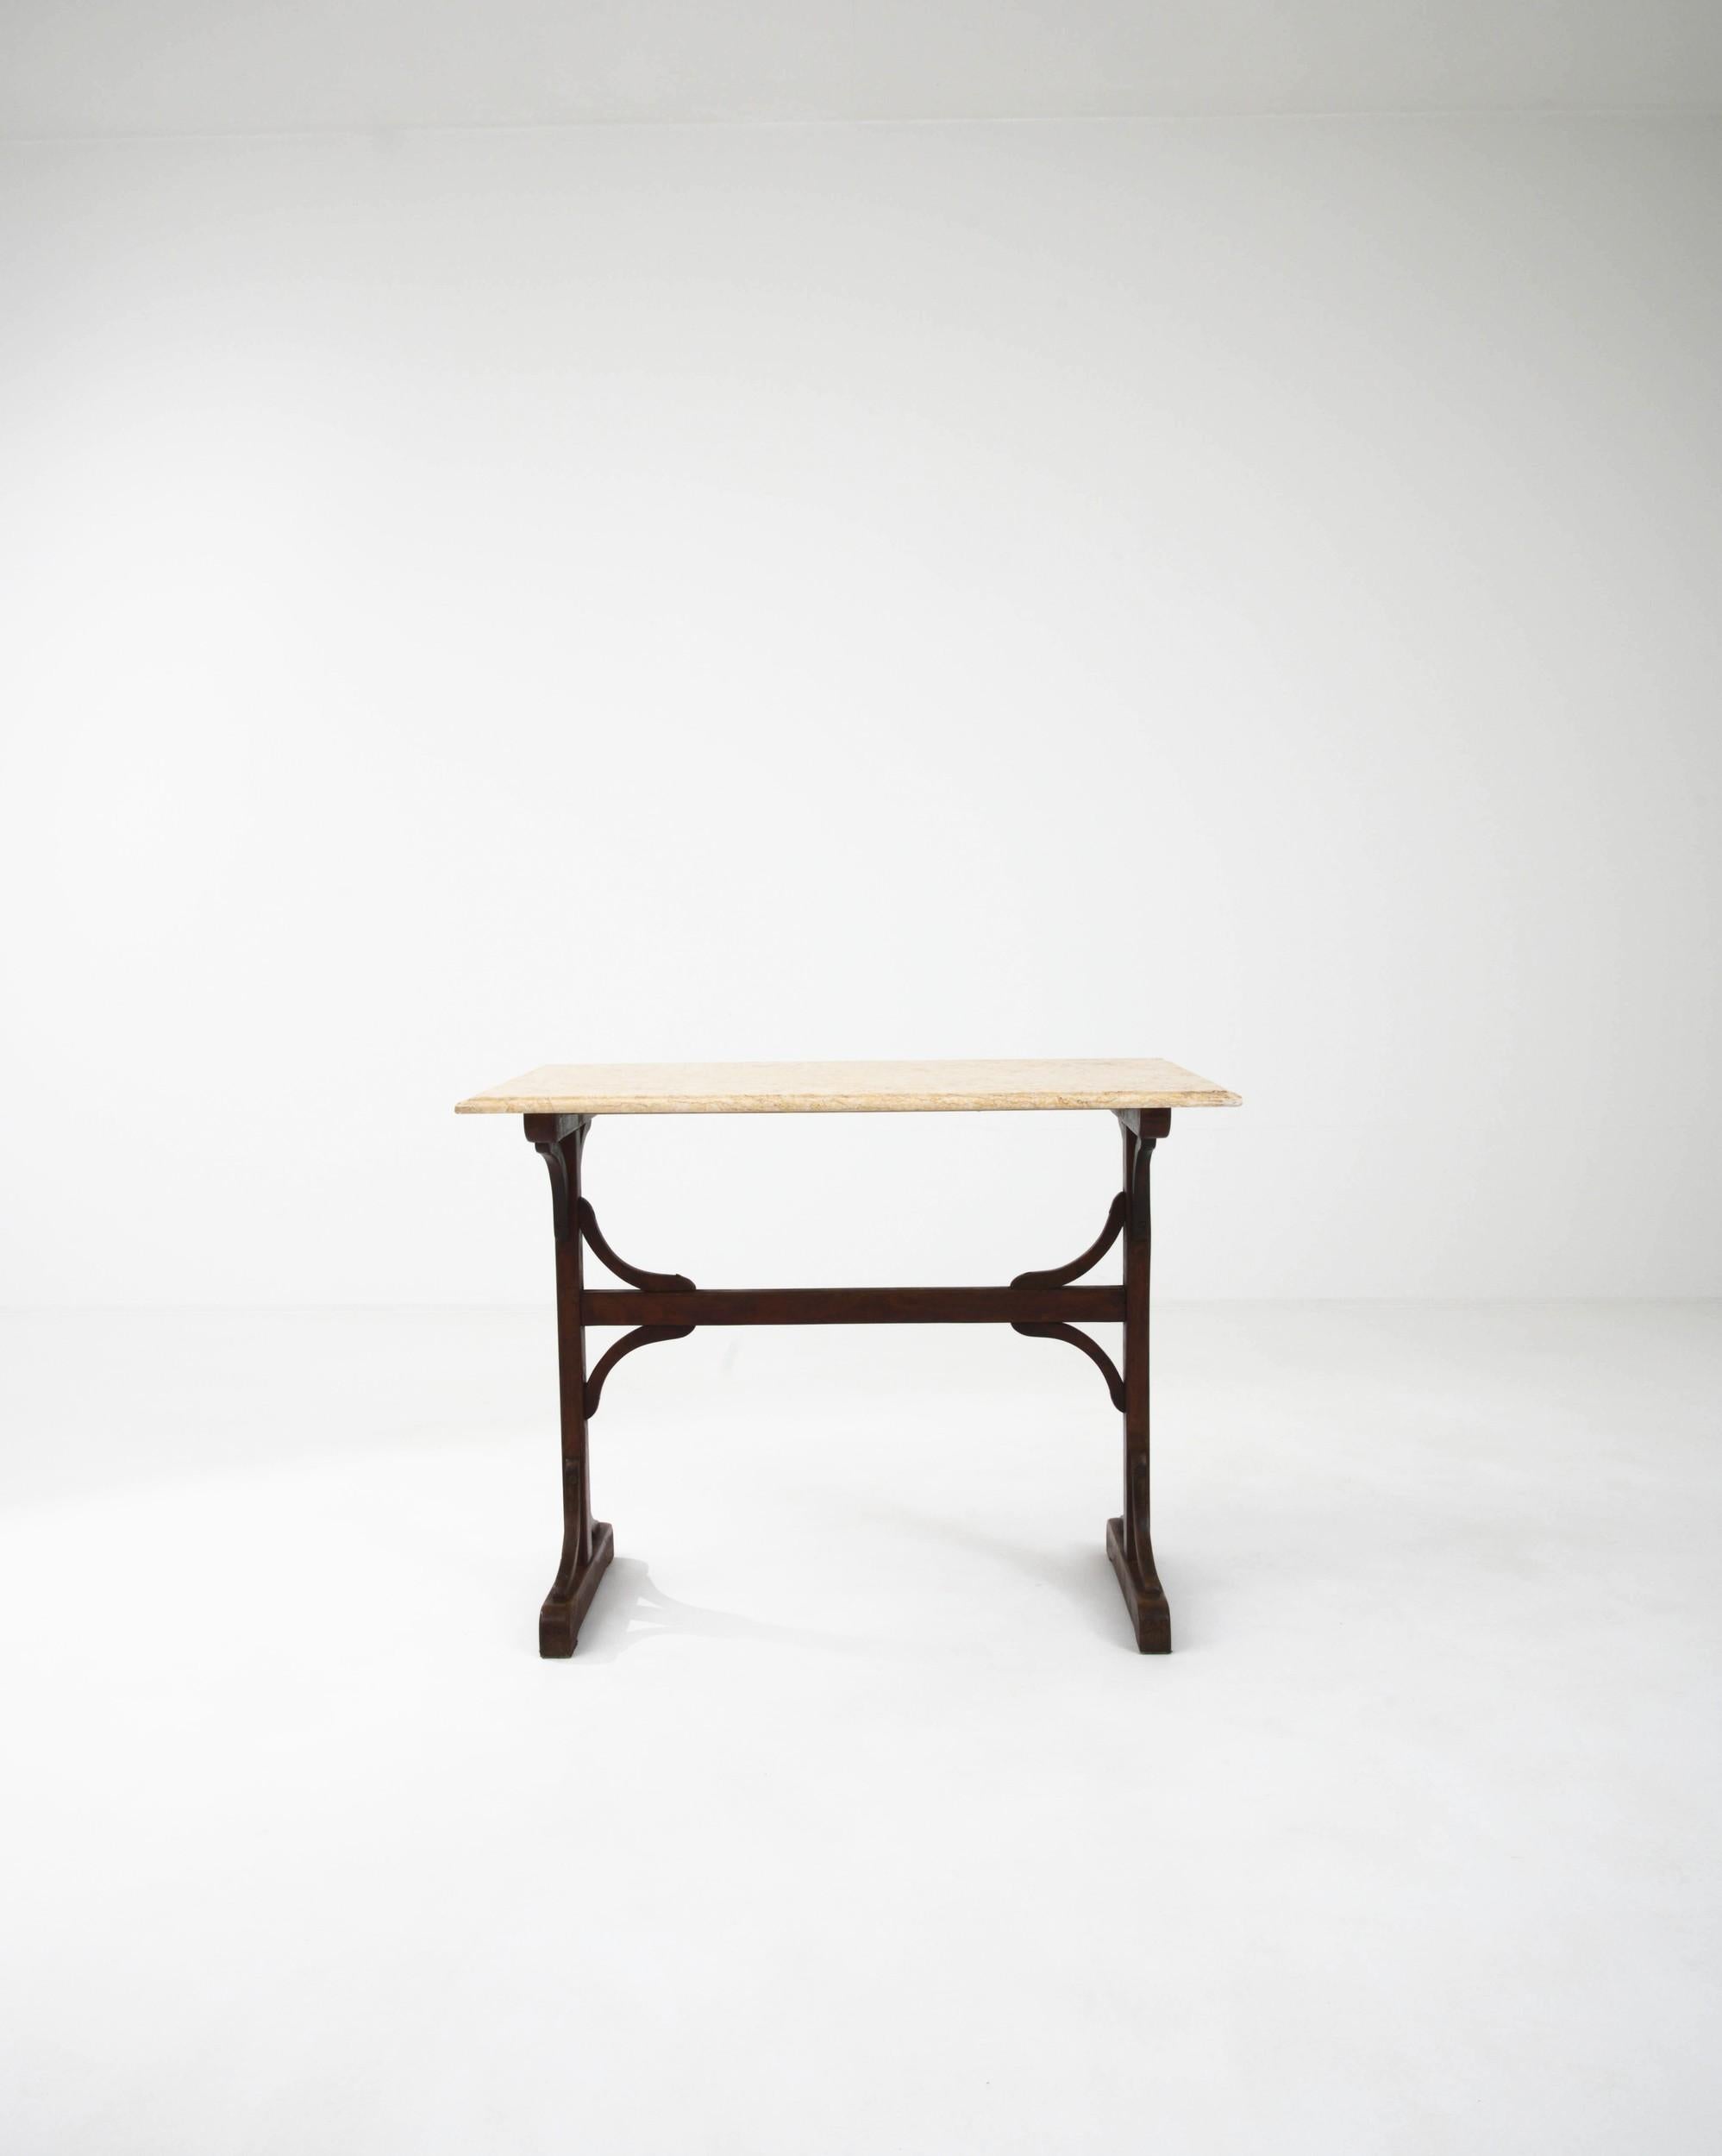 The unique design of this vintage side table makes a compelling find. Built in France at the turn of the century, a marble tabletop sits atop a wooden trestle frame. Bold lines are softened by rounded edges; the sinuous curves of the brackets create